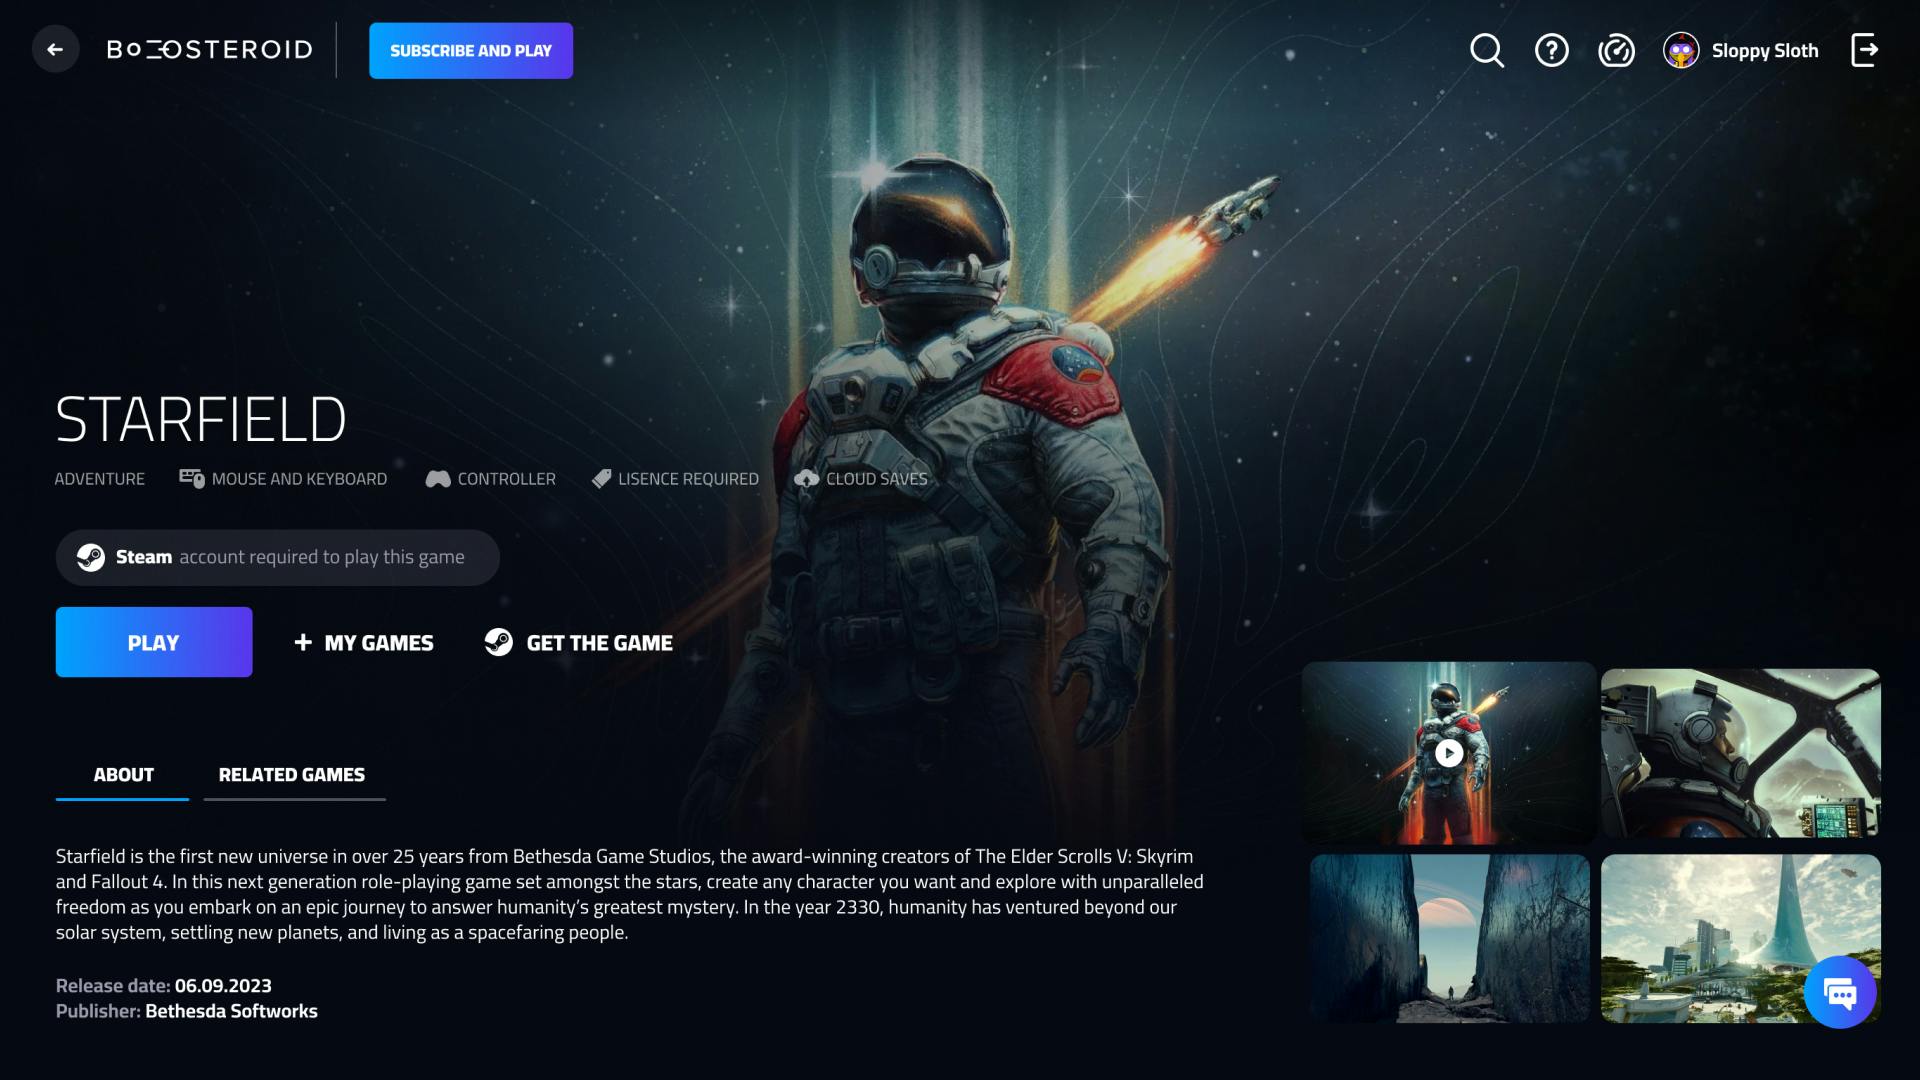 The Boosteroid platform highlighting Starfield, a Bethesta Softworks game. The screenshot includes a menu bar at the top with the Boosteroid logo and a button that says Subscribe and Play. The page shows a splash image of the video game, highlighting an astronaut, and buttons reading Play, + My Games, Get the Game.